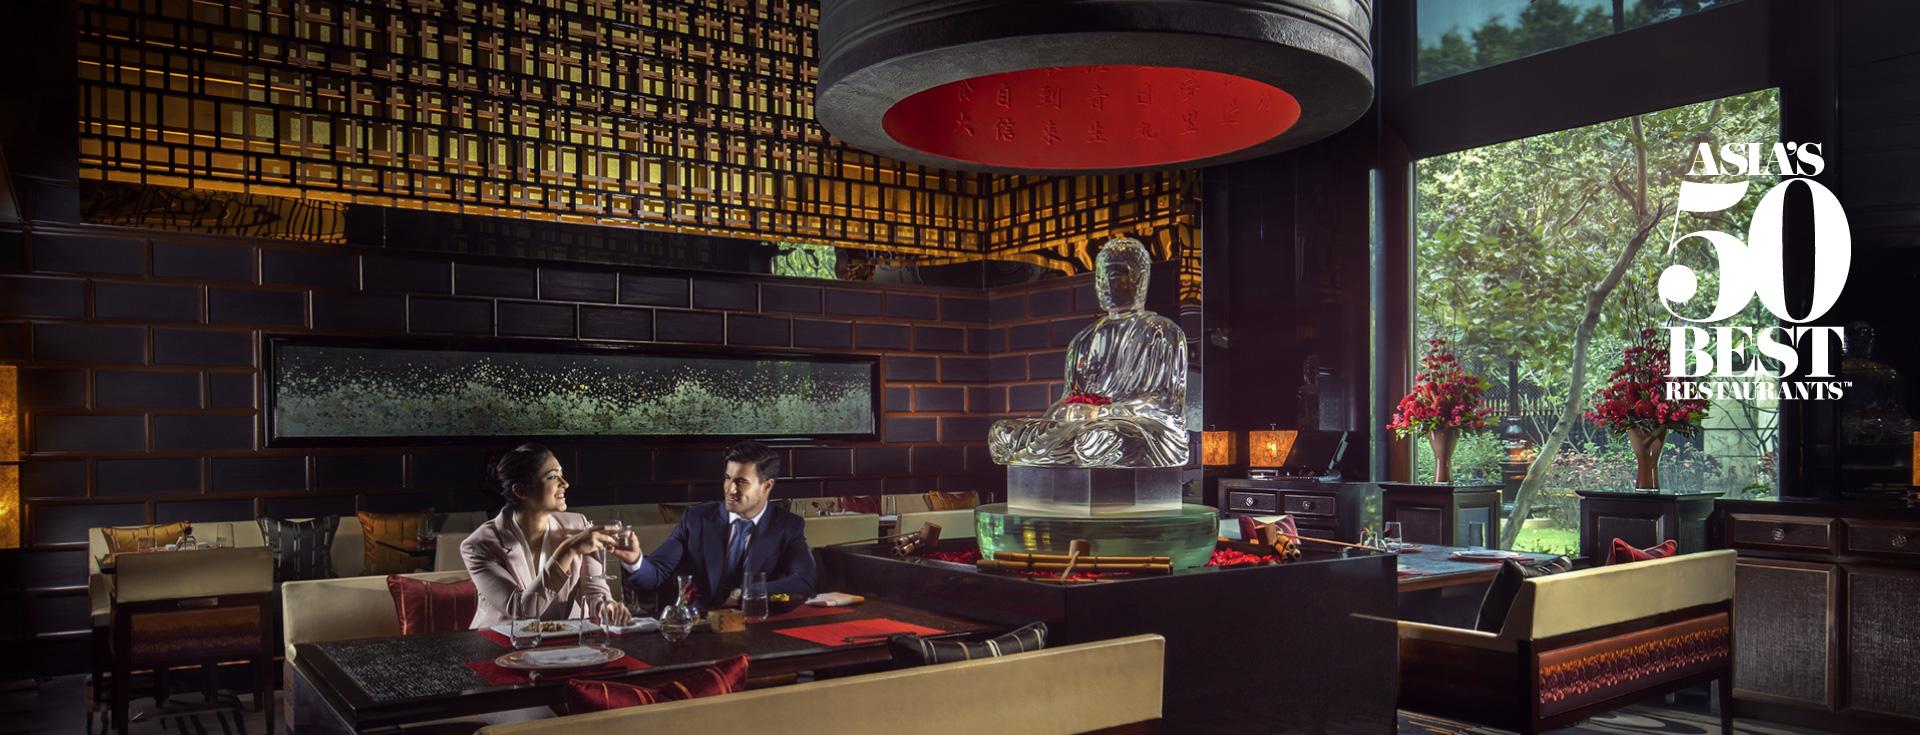 Leela New Delhi - Megu, recognized in the World's 50 Best Discovery